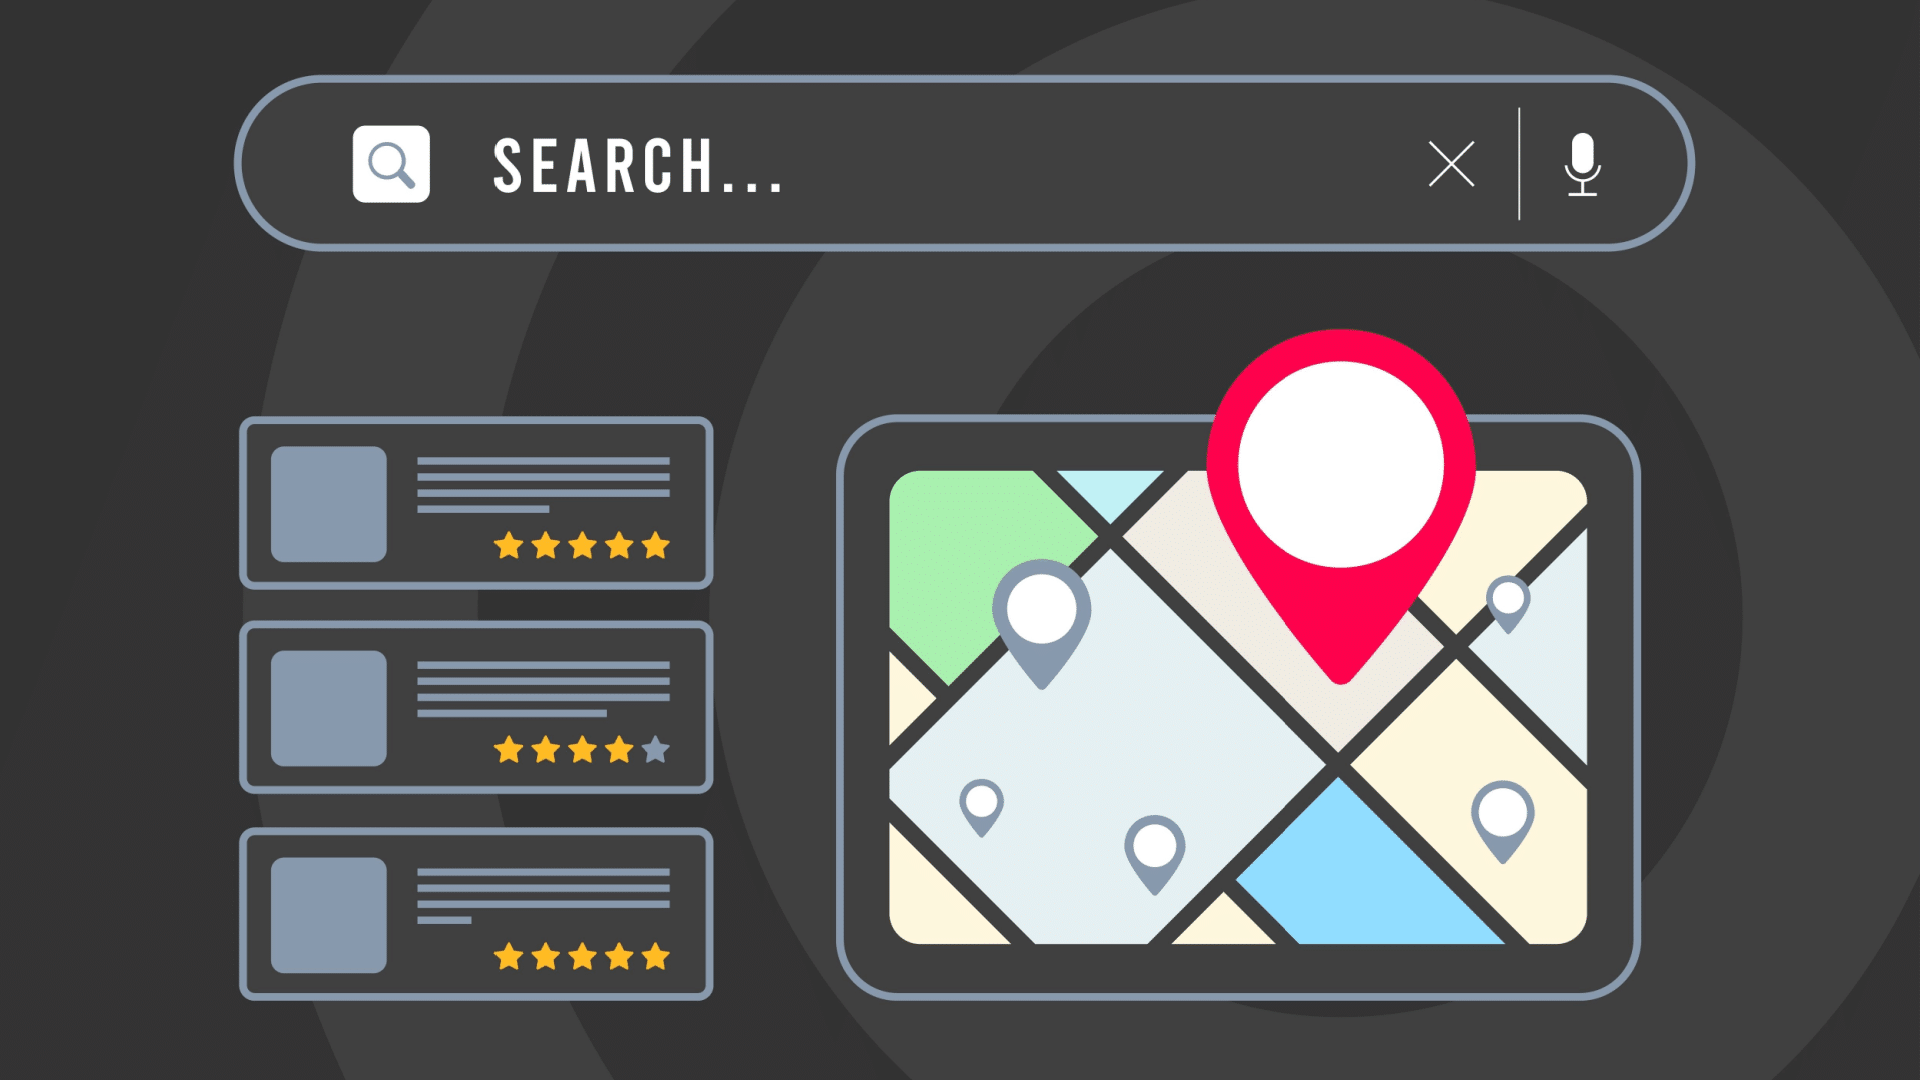 How can businesses leverage local SEO for better visibility?